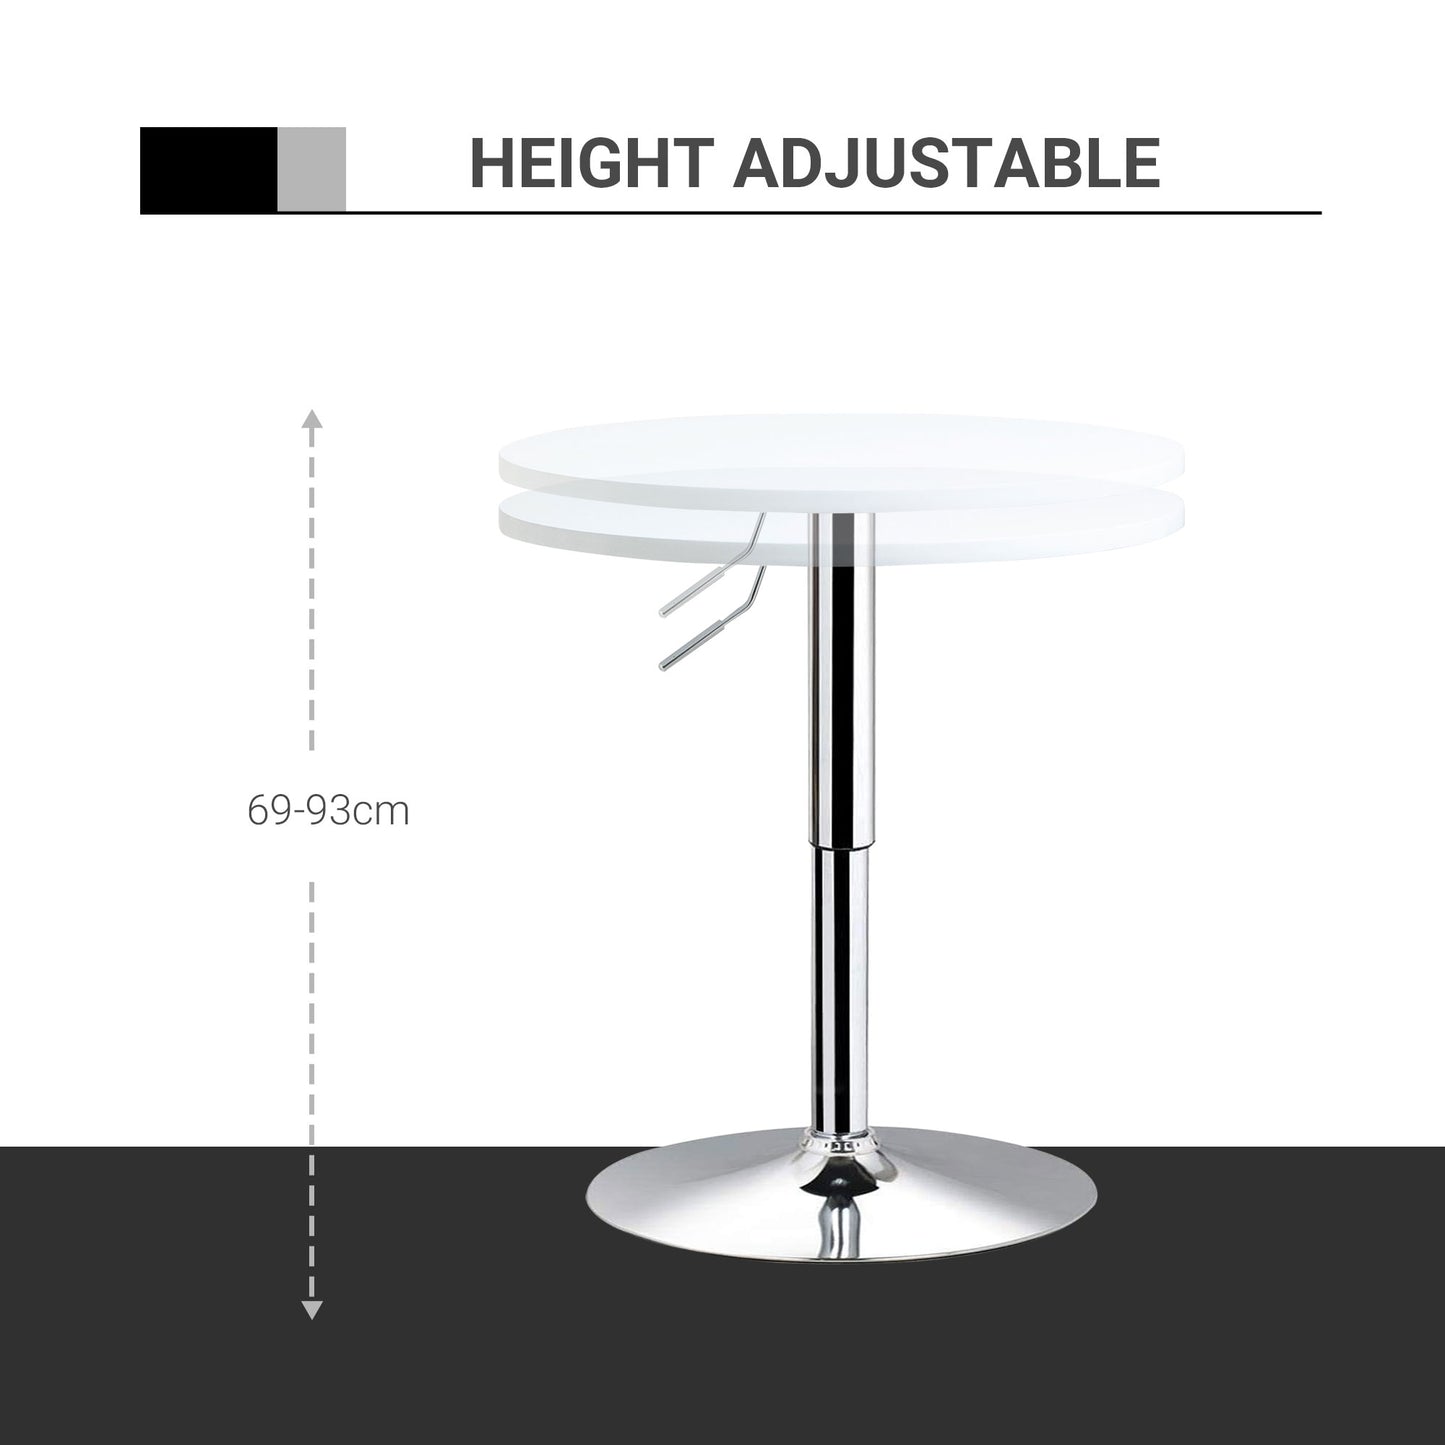 HOMCOM Bar Table Φ60cm Adjustable Height Round Bistro Table w/ Swivel Top Metal Frame Counter Surface Stylish Kitchen Conservatory White